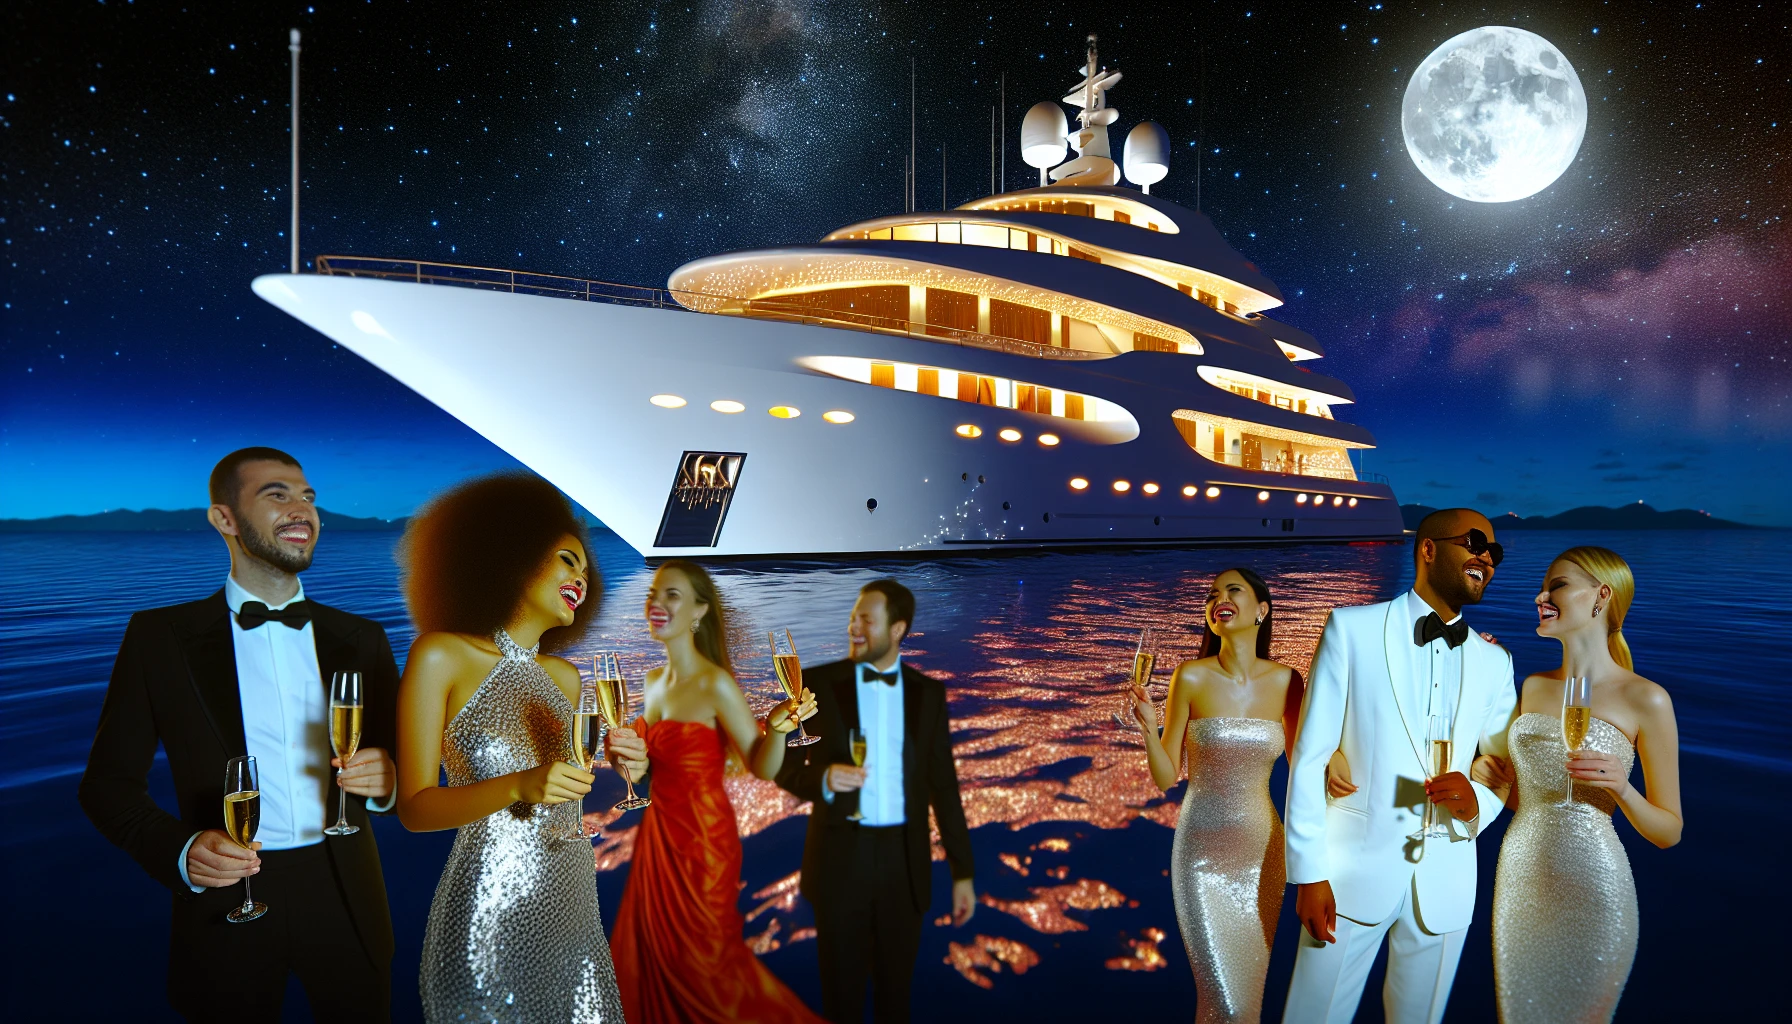 Luxurious yacht with people enjoying a glamorous party on the ocean